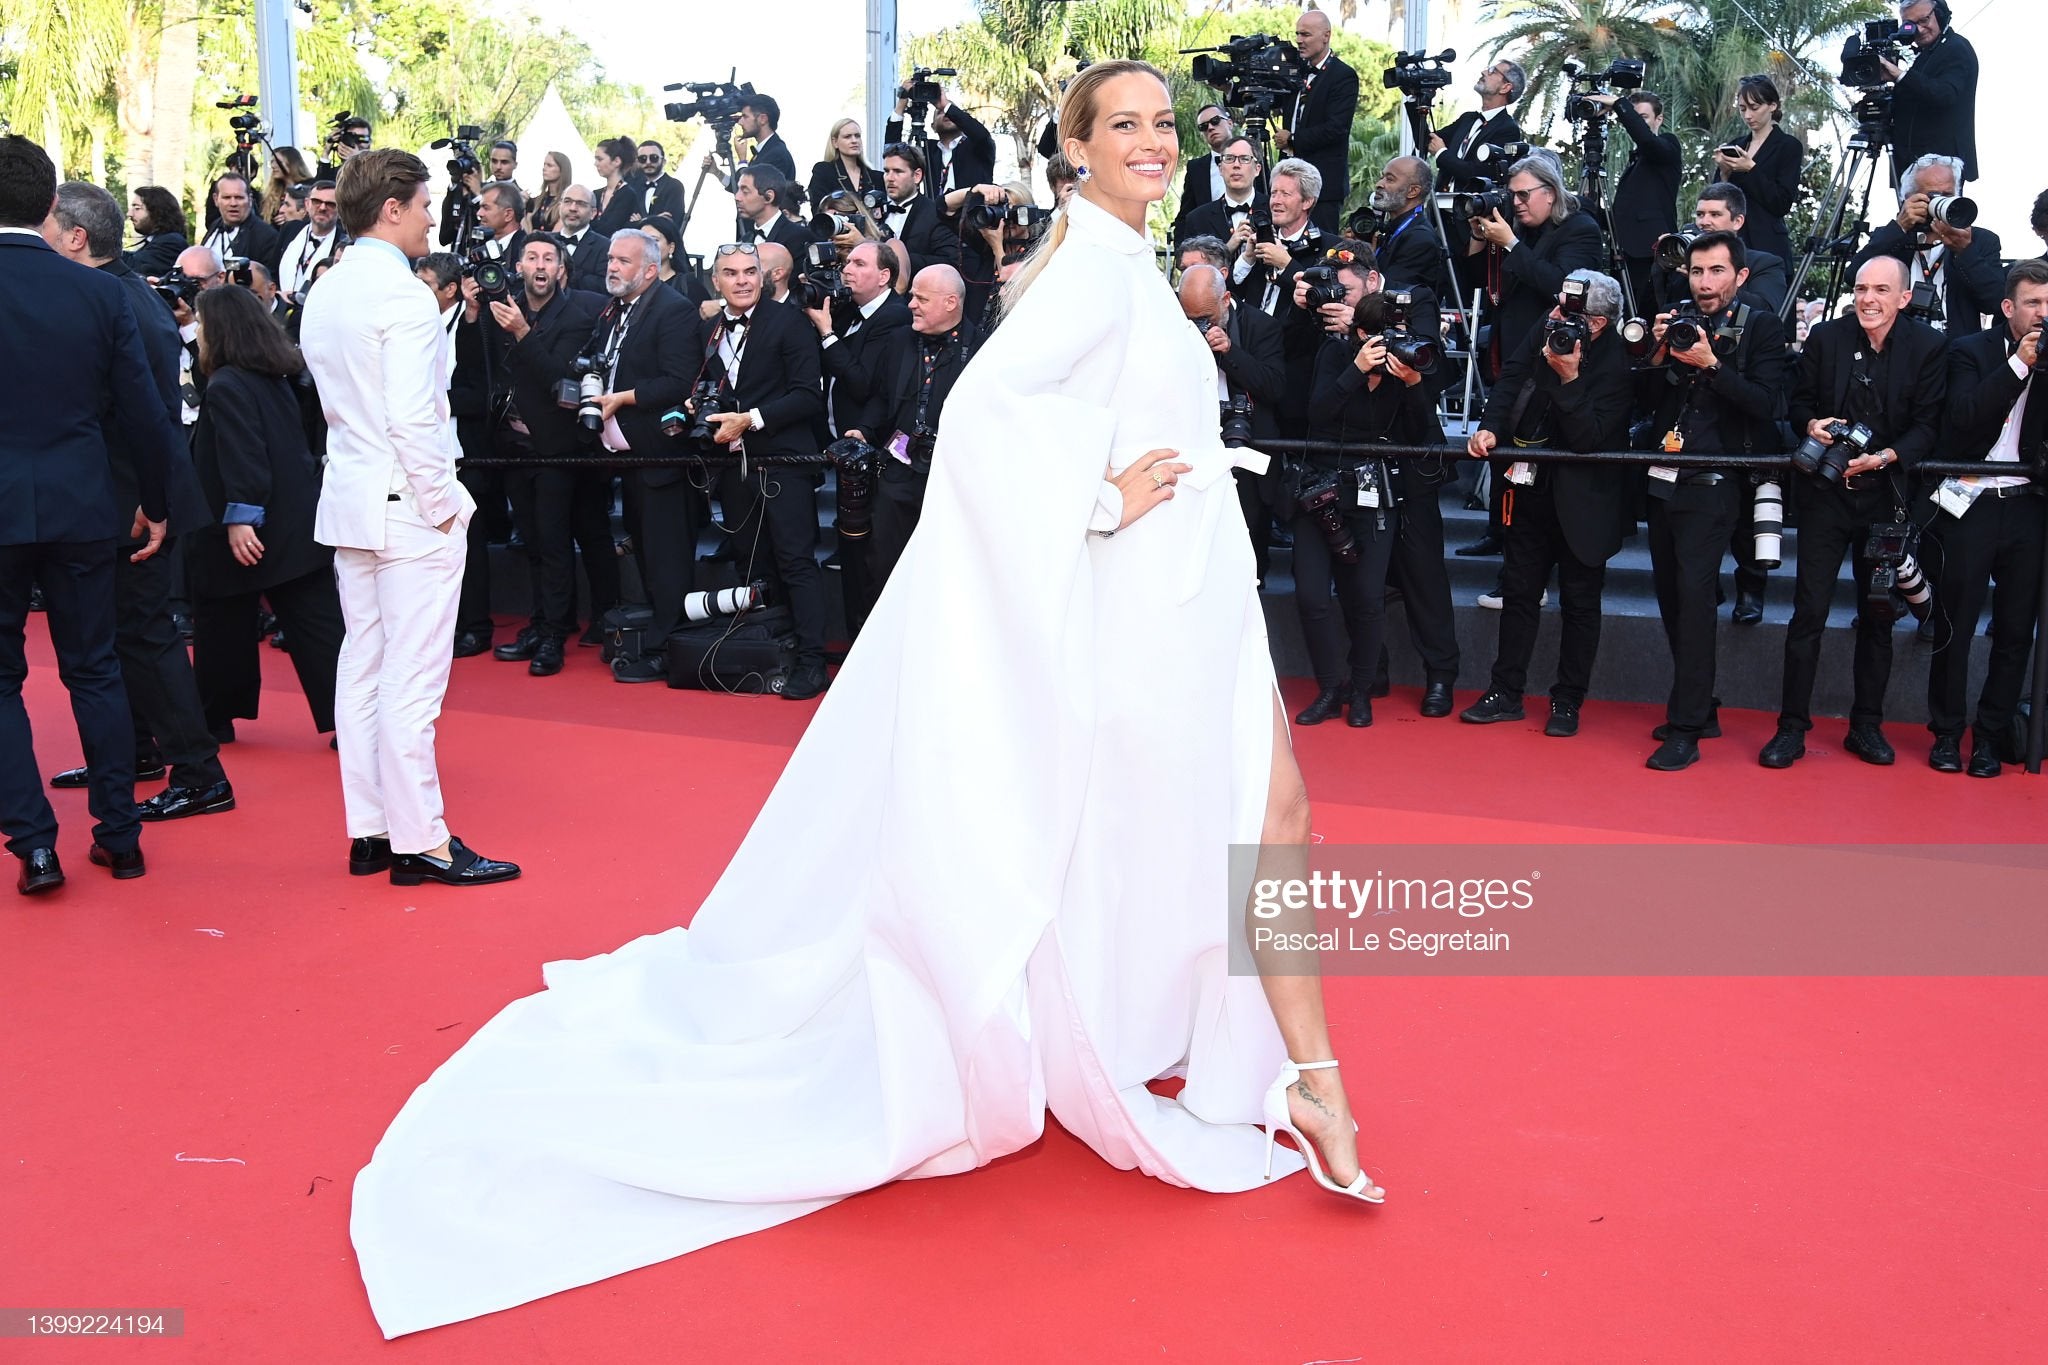 Petra makes an entrance at the 75th Annual Cannes Film Festival. | Photo by Pascal Le Segretain via Getty Images